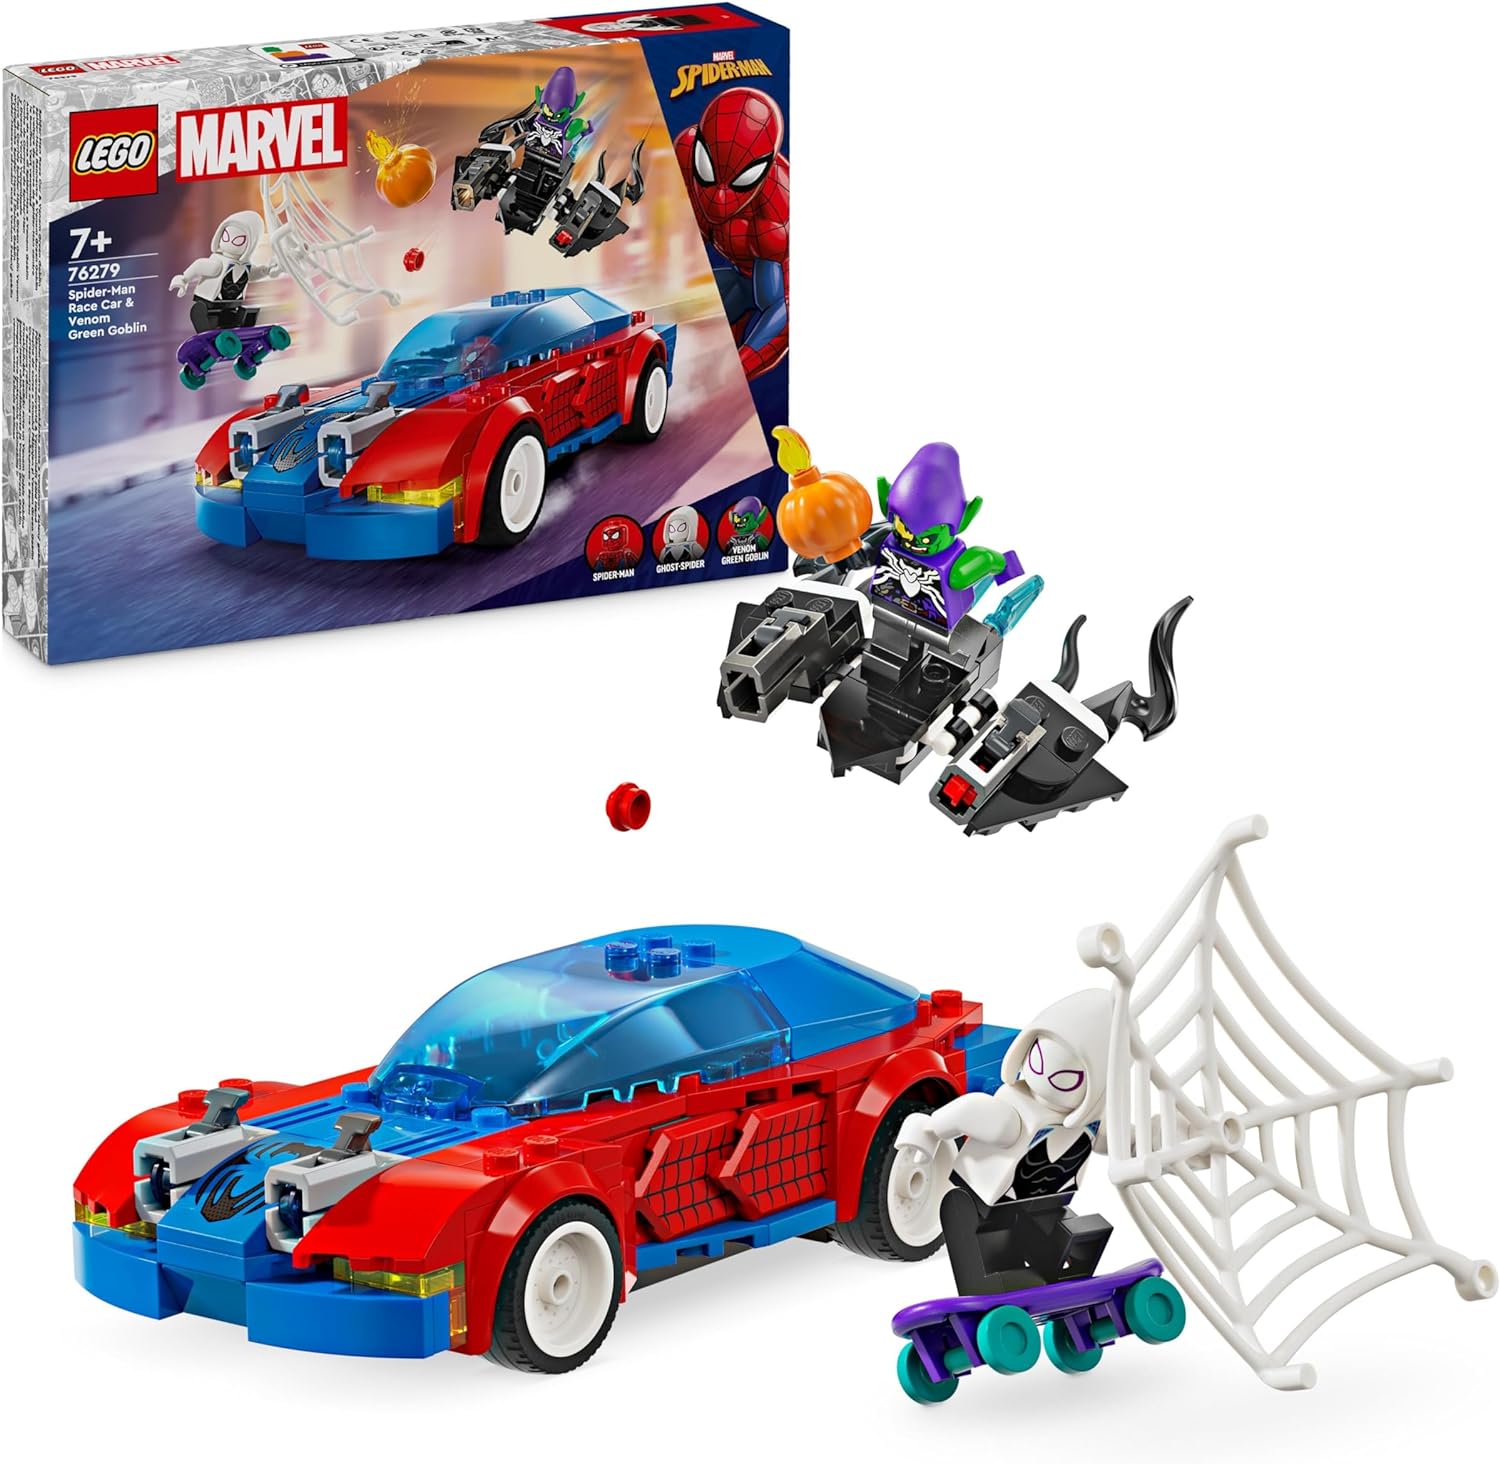 LEGO Marvel Spider-Mans Racing Car & Venom Green Goblin, Spidey Toy for Role Play with Superhero Figures and Buildable Car, Gift for Children, Boys and Girls from 7 Years, 76279